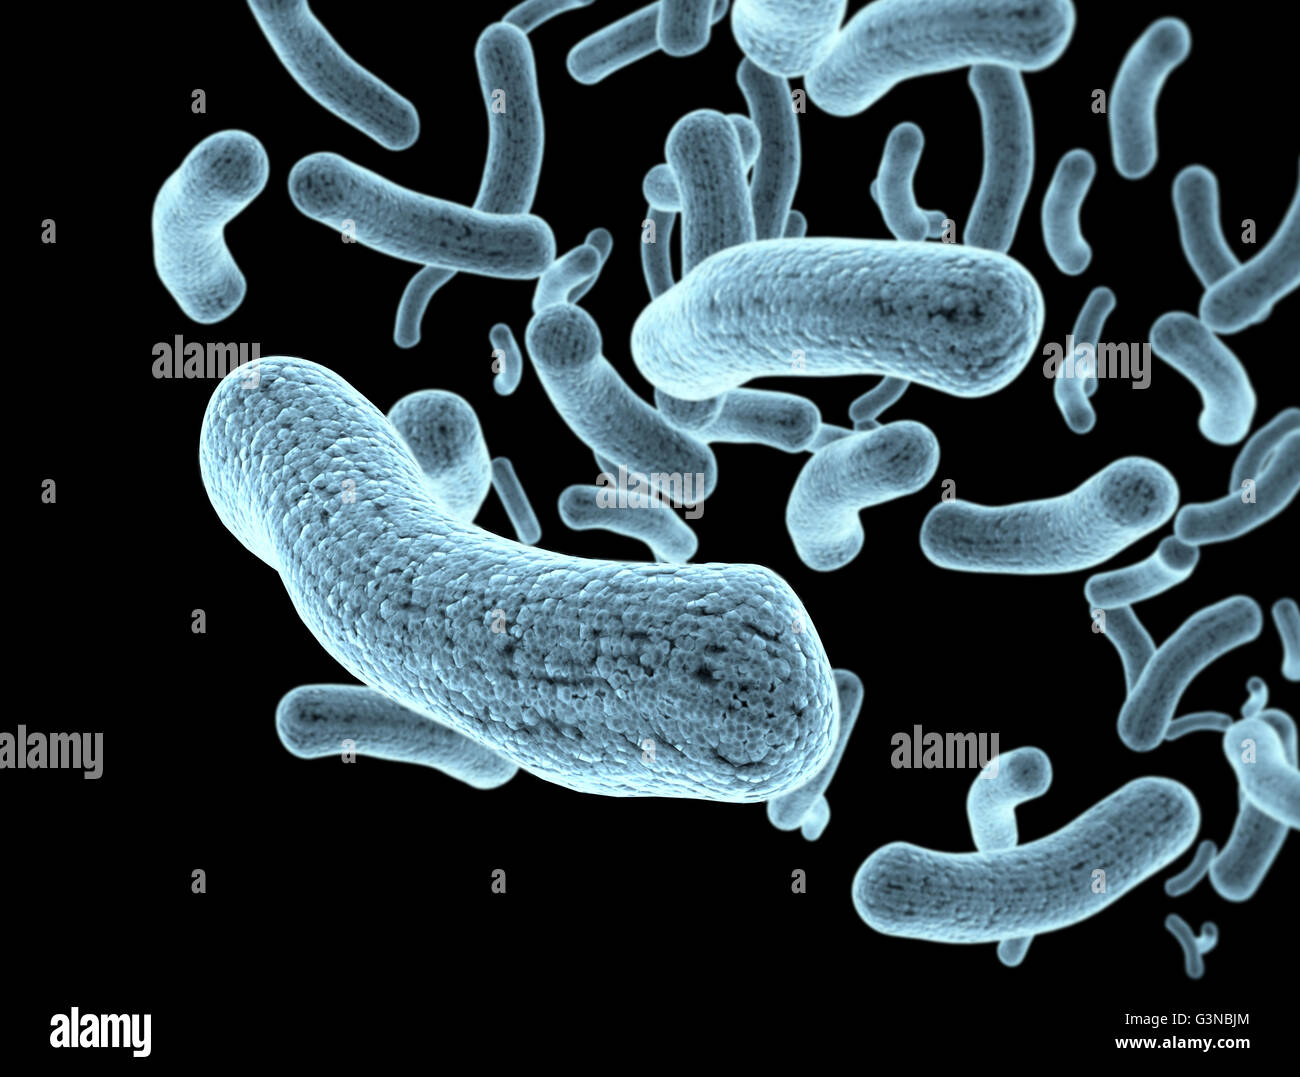 Bacteria and bacterium cells medical illustration of bacterial disease infection Stock Photo